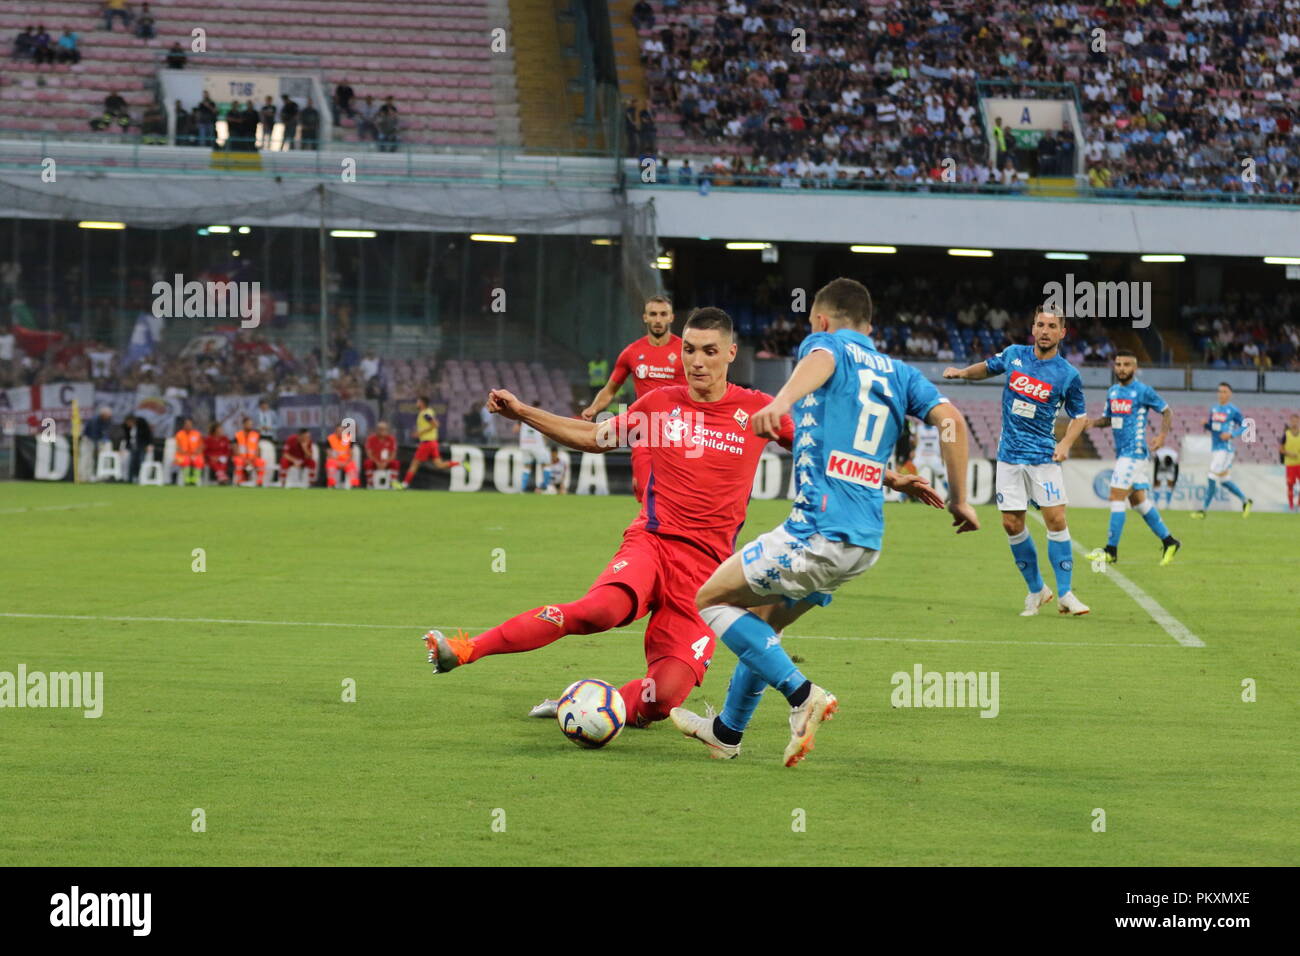 Naples, Italy. 15th September 2018. . In the picture: the Florentine player Milenkovic tries to take the ball off Mario Rui from Napoli.Stadium San Paolo Naples - 09/15/2018 - Italy.final result SSC Napoli 1 AC Fiorentina 0. Credit: Fabio Sasso/ZUMA Wire/Alamy Live News Stock Photo